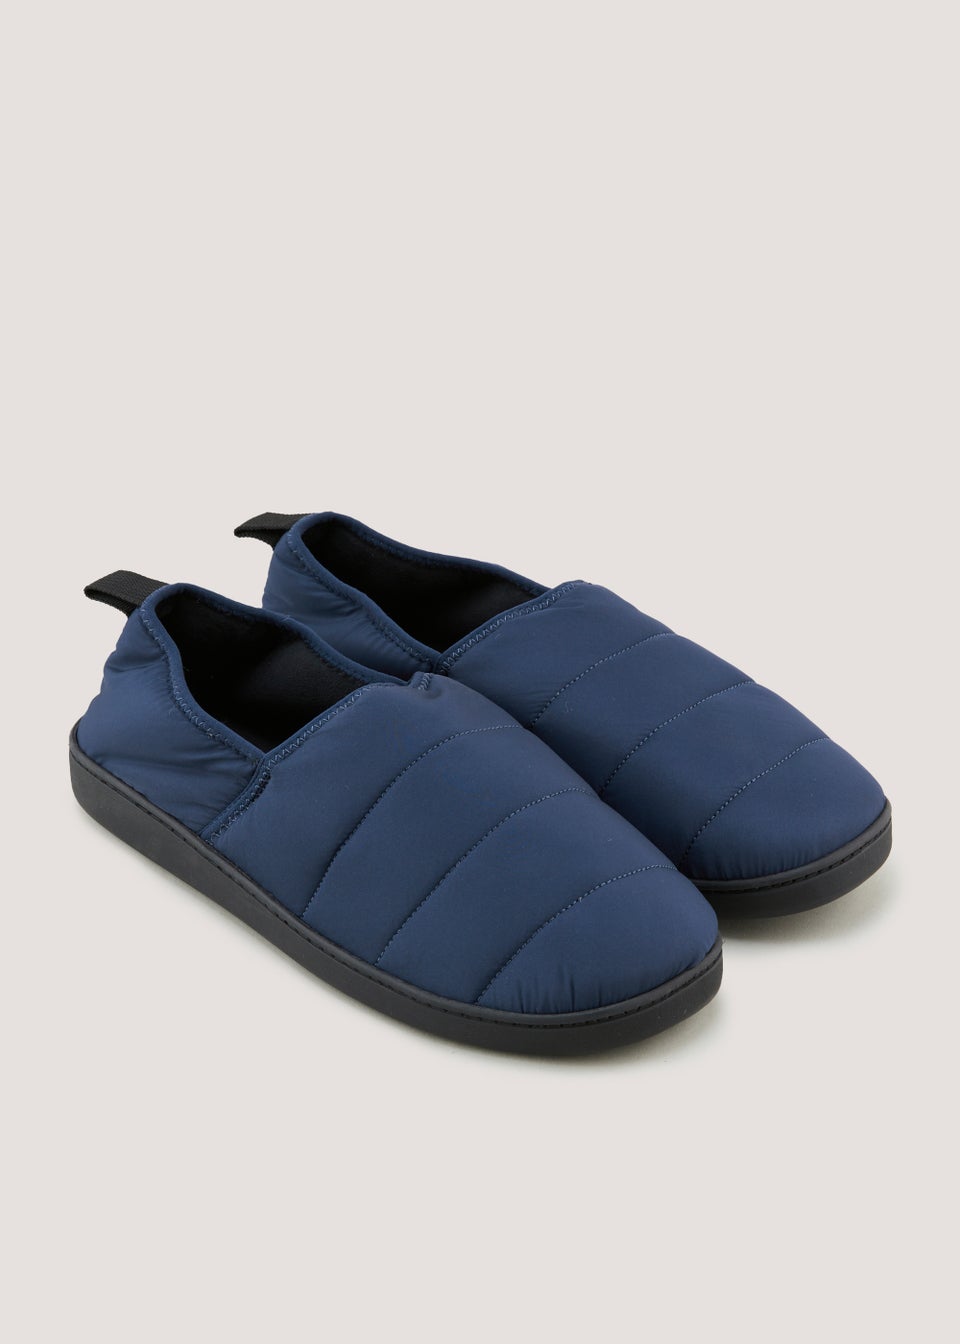 Navy Thinsulate Baffle Slippers